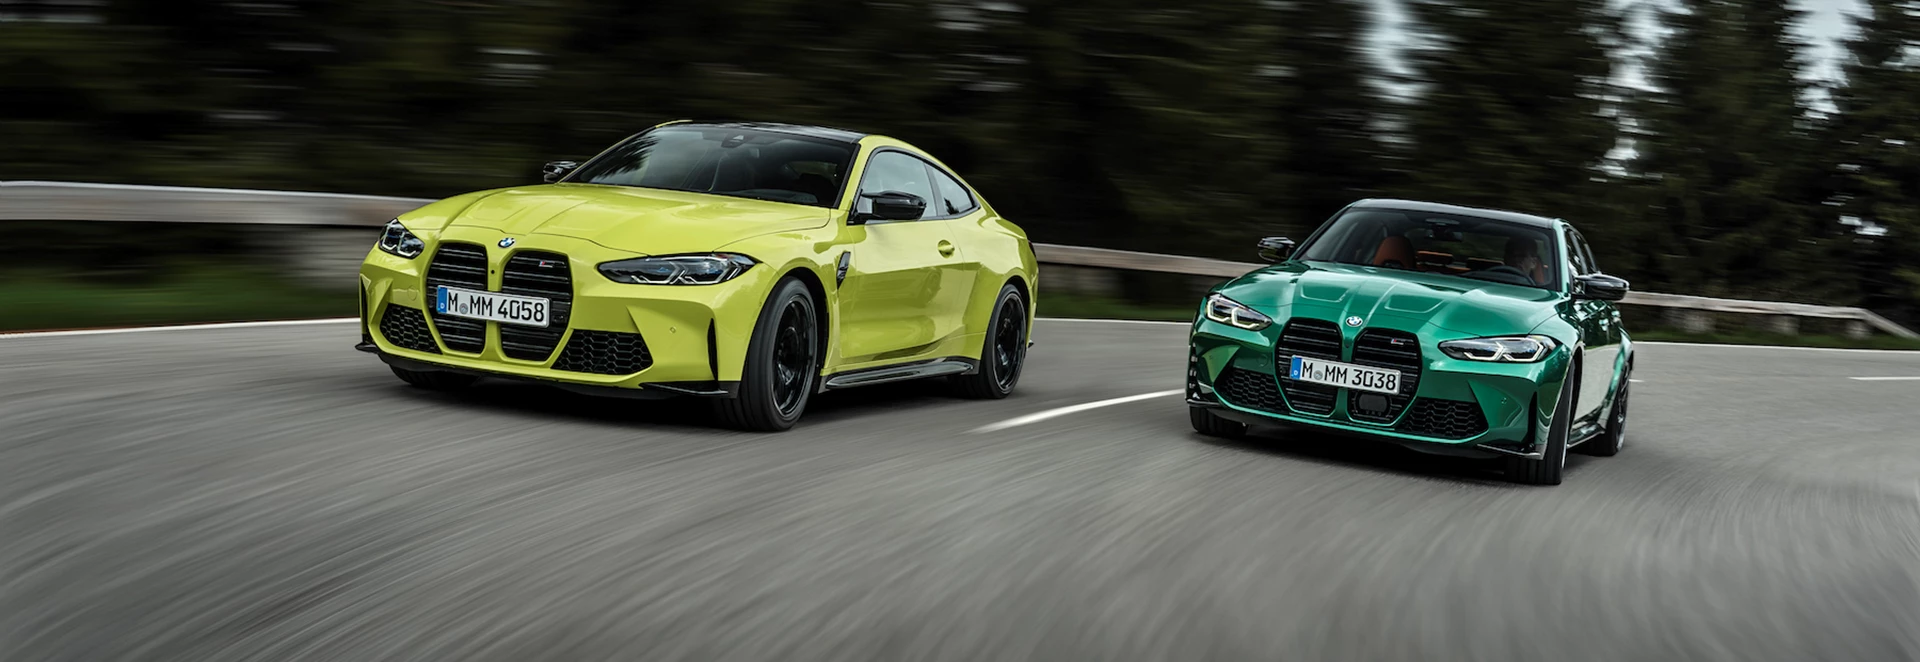 2021 BMW M3 and BMW M4 unveiled 